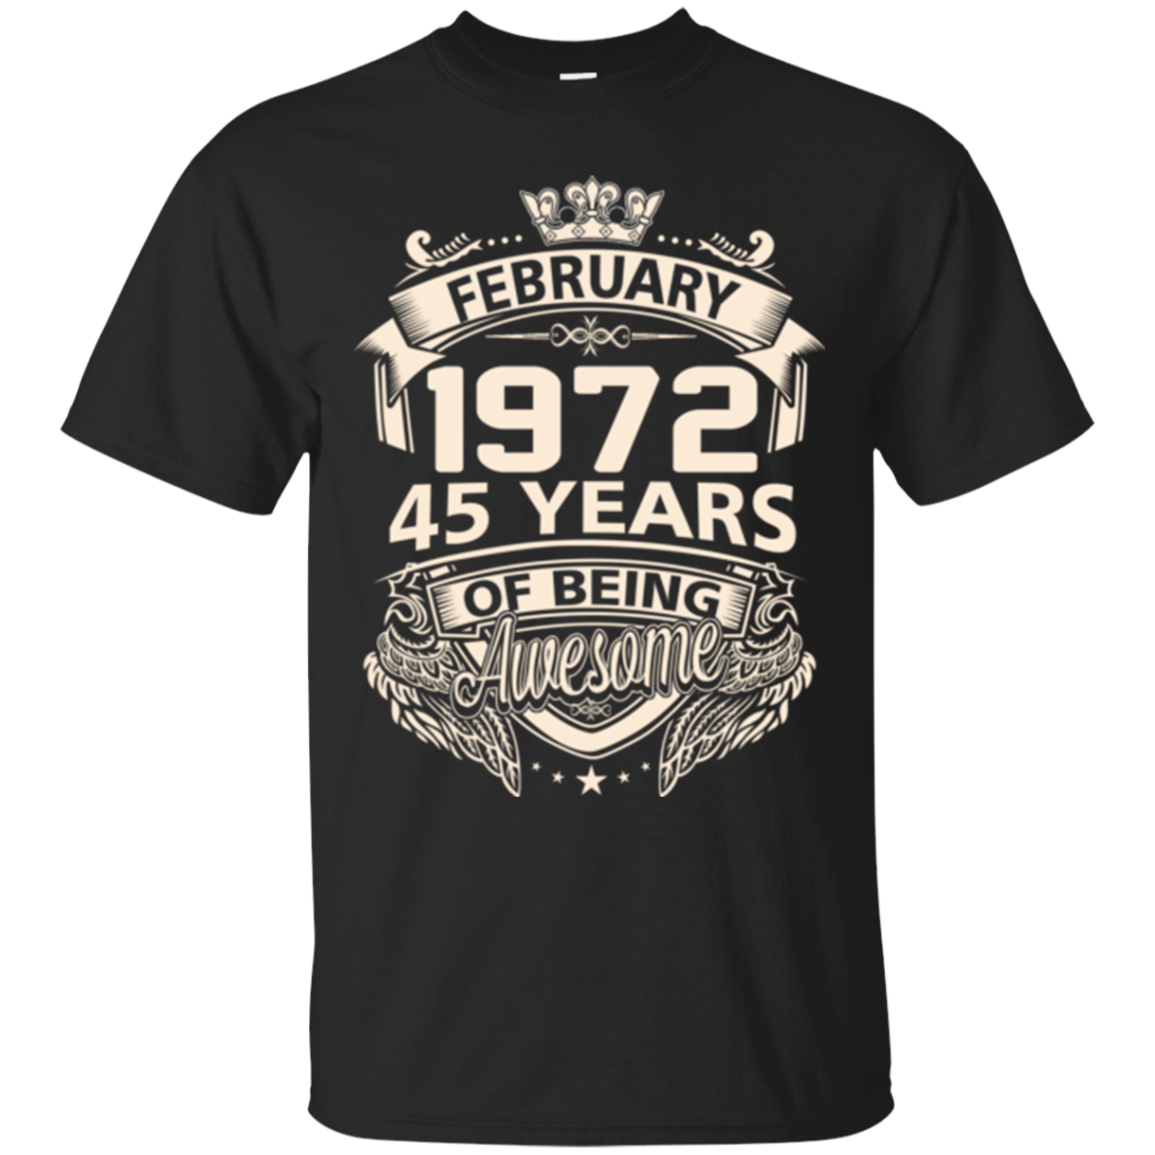 February 1972 Shirts February 1972 45 Years Of Being Awesome - Teesmiley